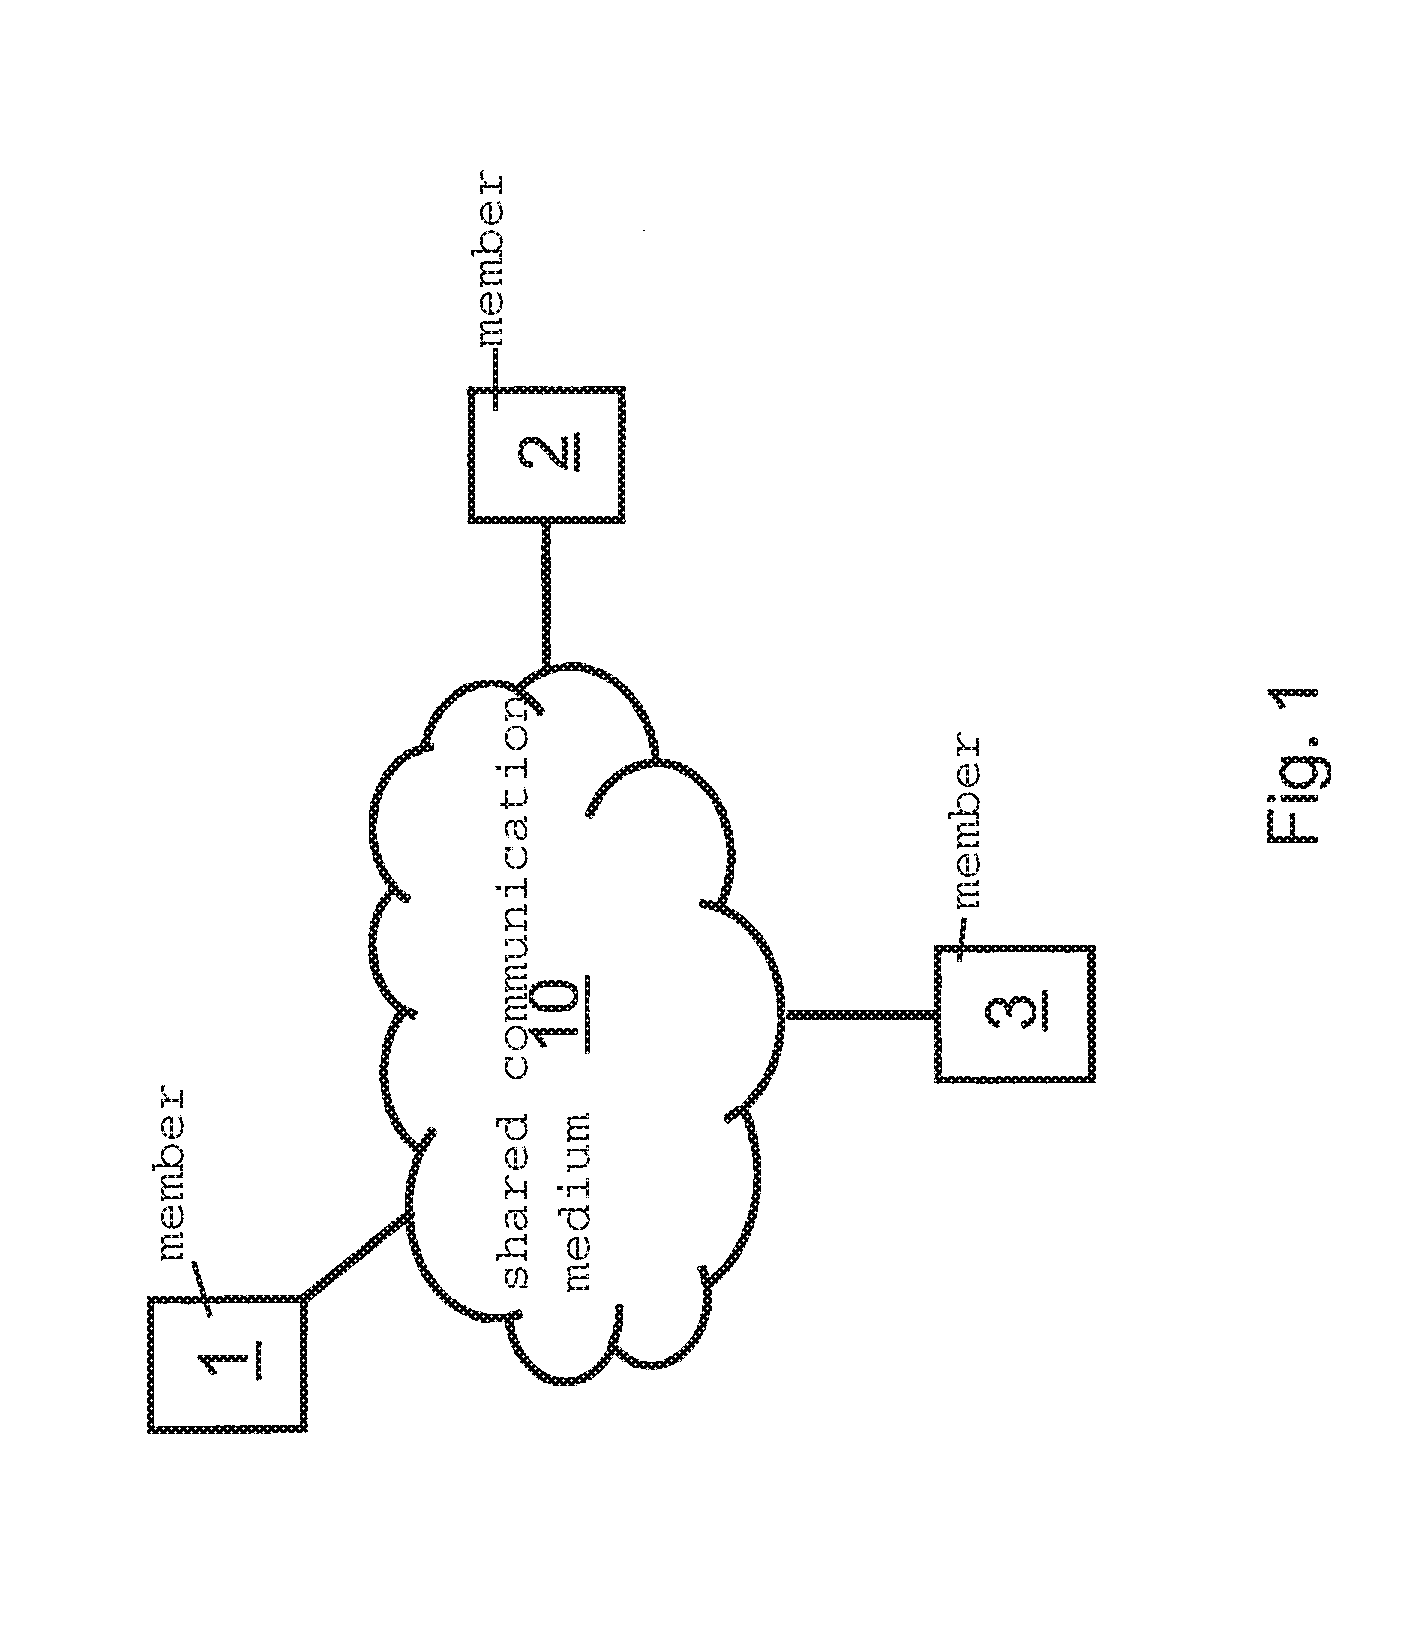 Method for generating a secret or a key in a network